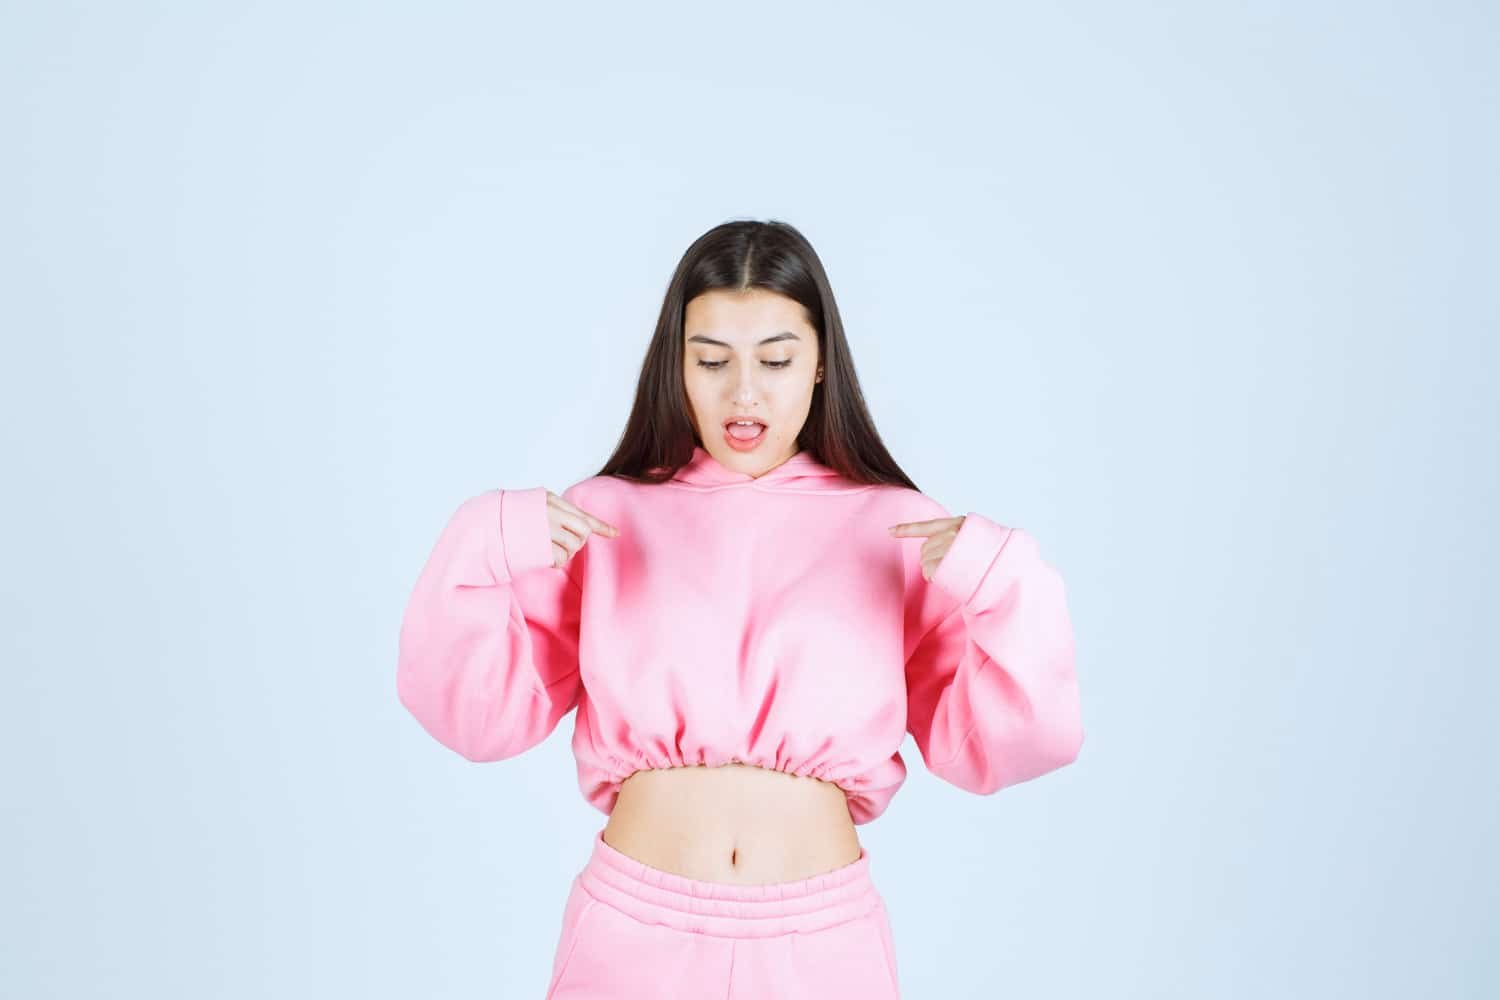 She Thinx Reimagining Period Protection